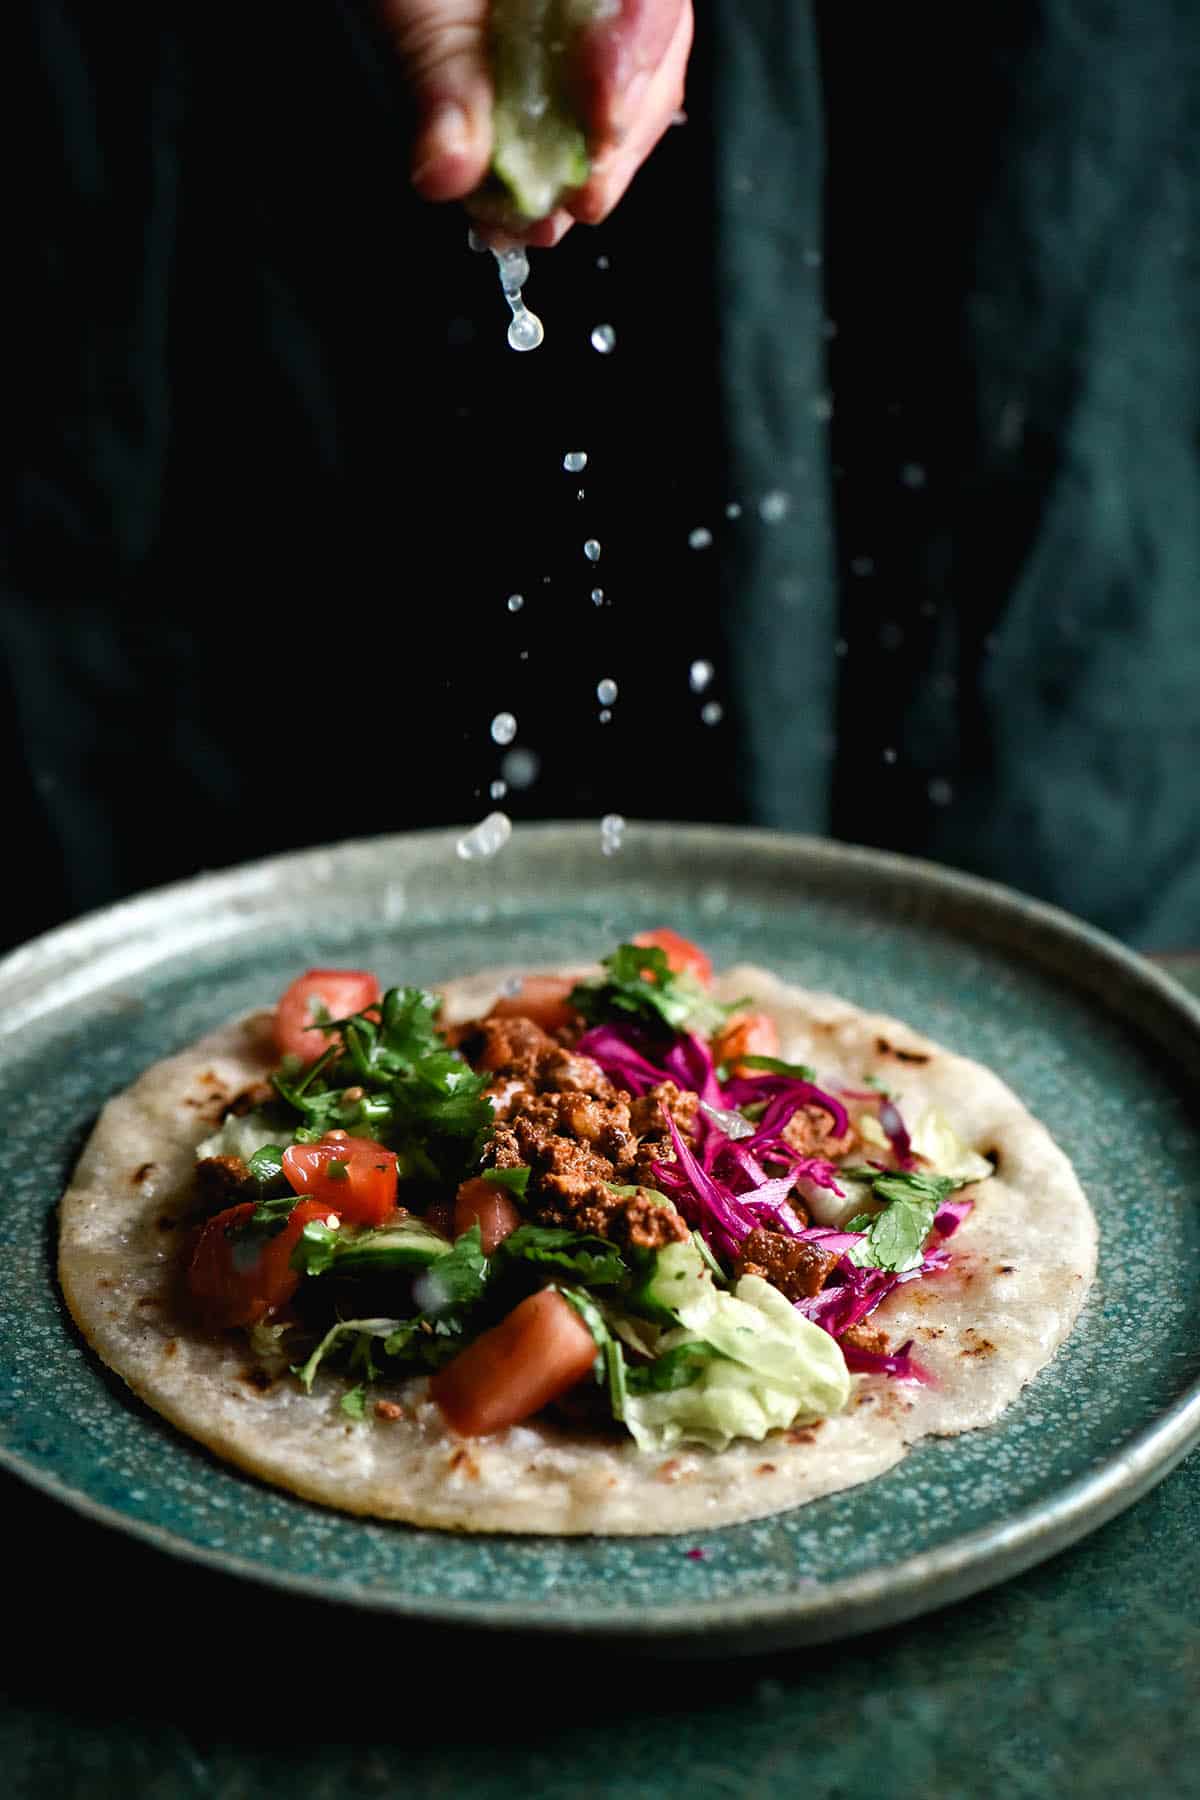 A side on photo of a gluten free tortilla topped with vegetarian taco mince and salsa. The tortilla sits atop an green plate on an olive green table, set against an olive green linen backdrop. A hand extends down from the centre top of the image to squeeze lime onto the tortilla. The droplets of lime juice are frozen in frame on the way down.